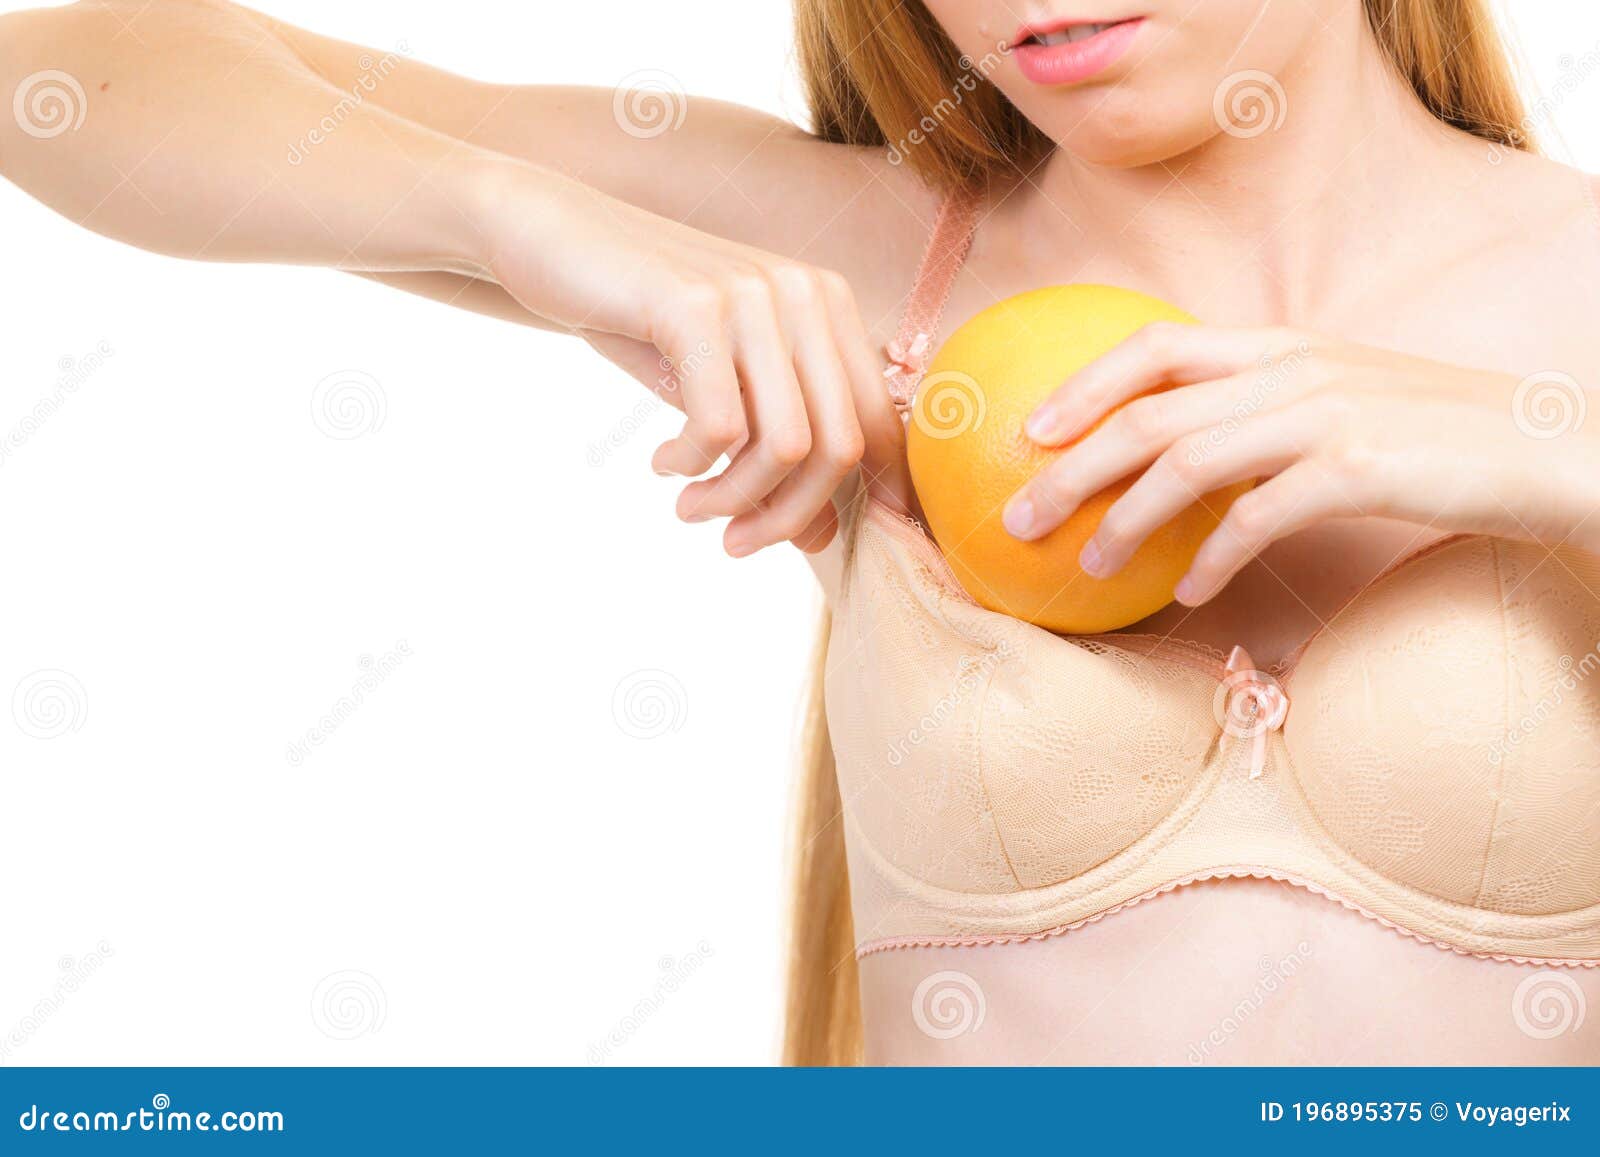 Woman Small Boobs Puts Big Fruit in Her Bra Stock Image - Image of